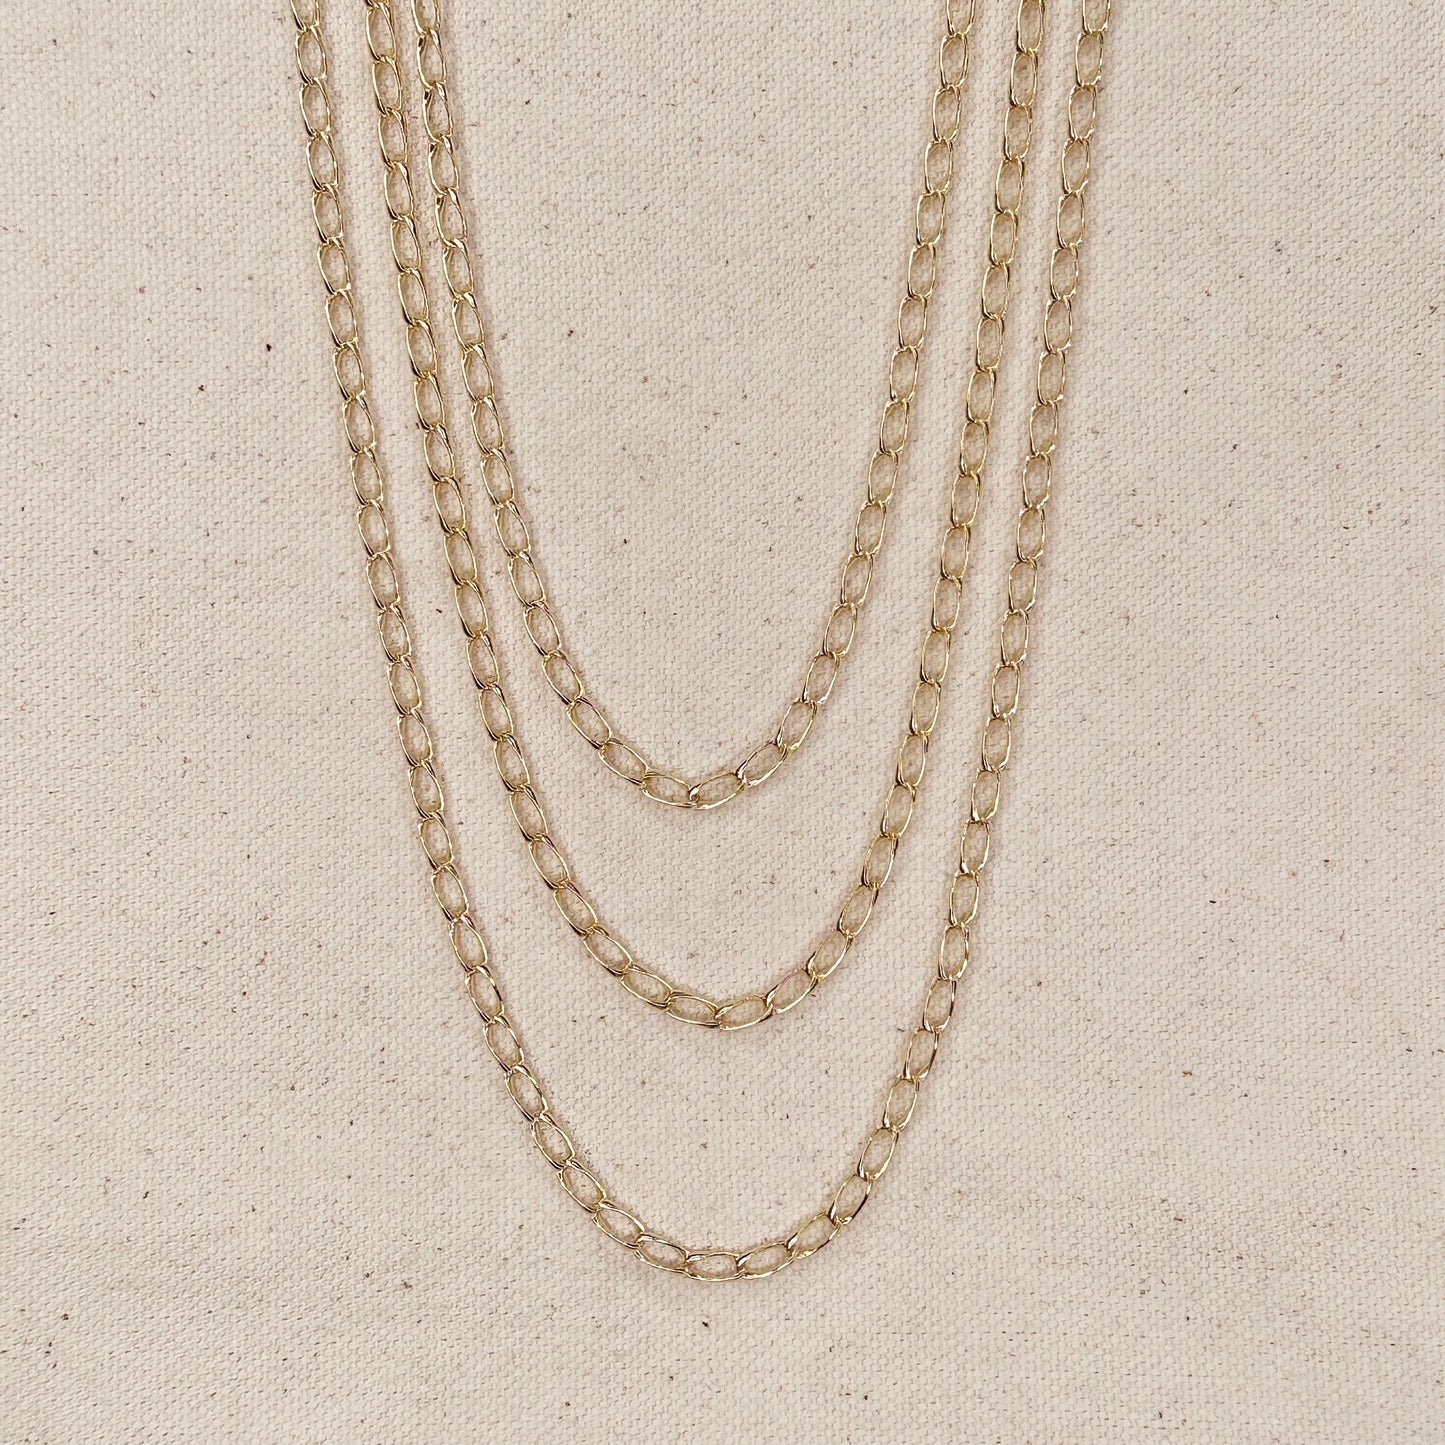 18k gold-filled chain necklace in three different sizes 16", 18" and 20"